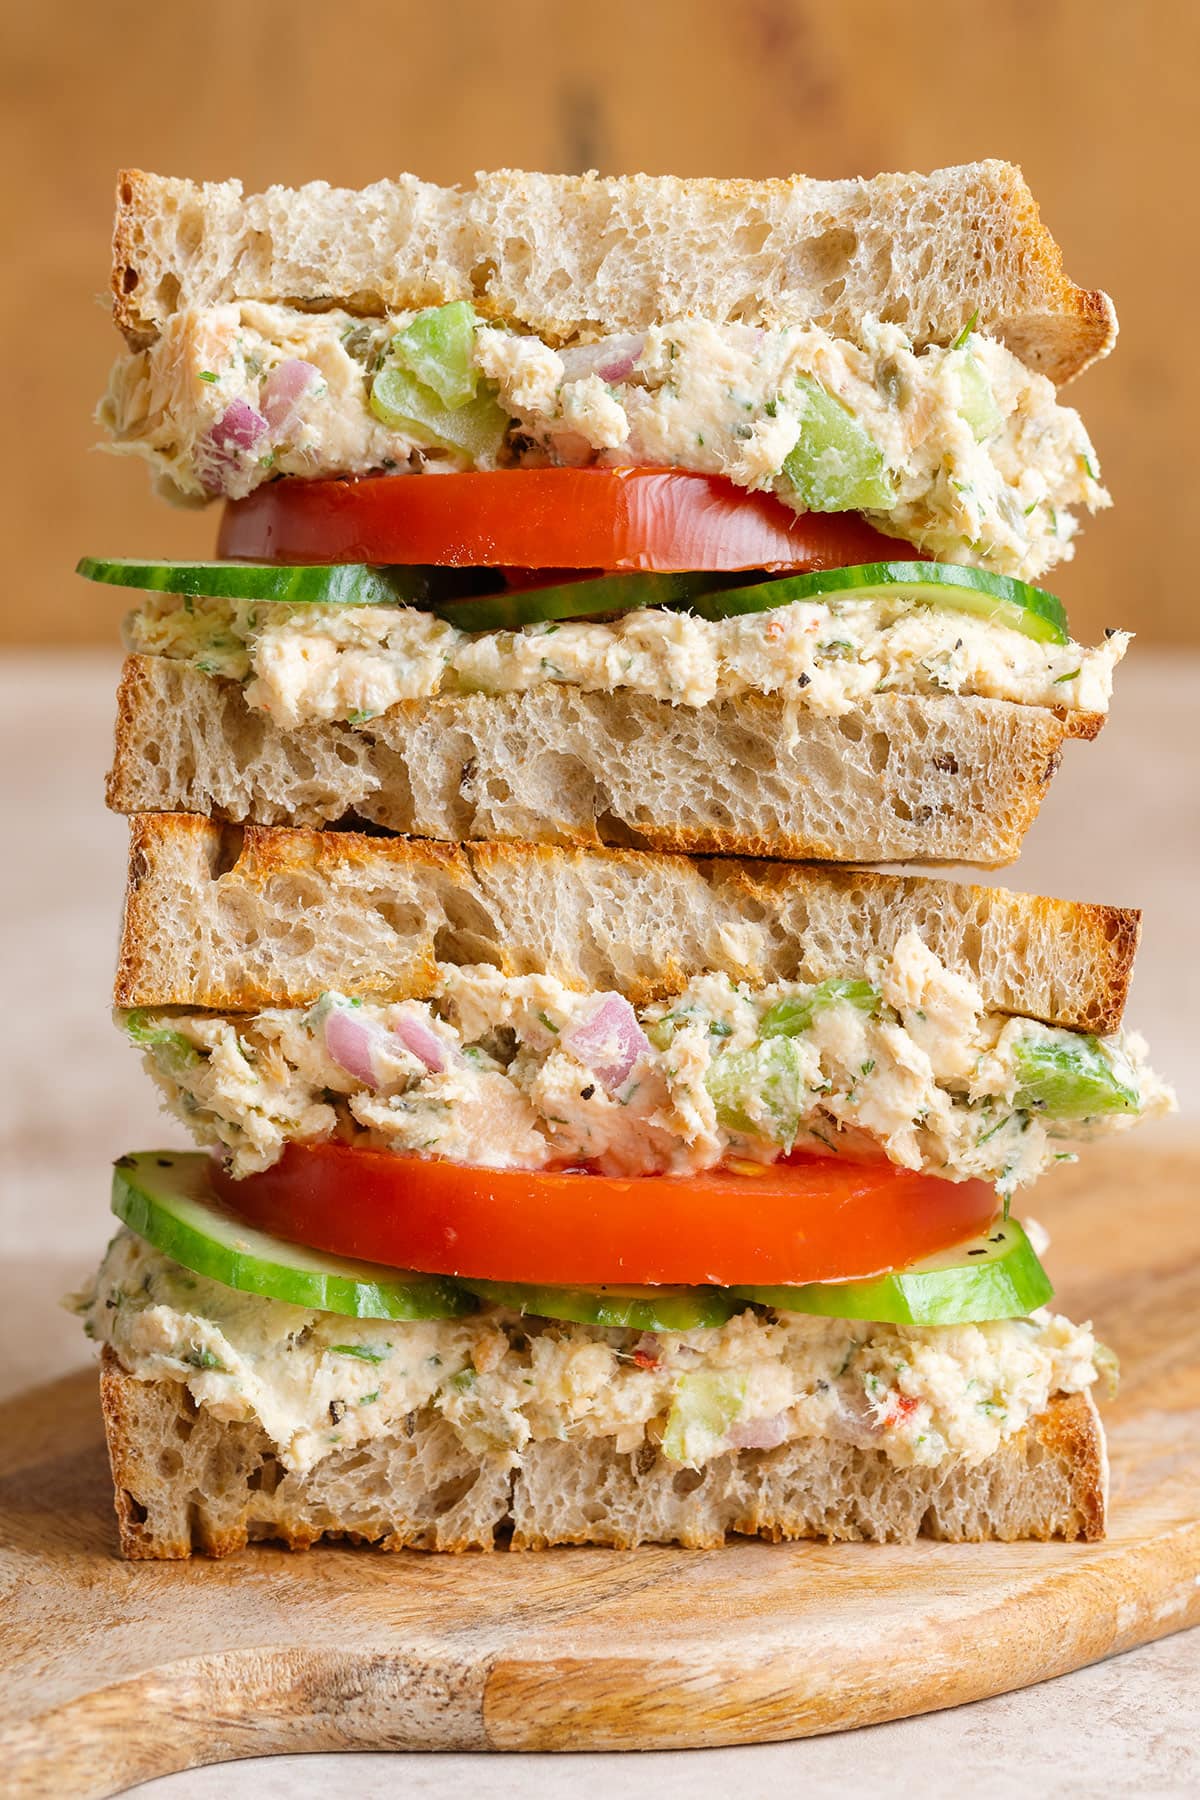 A sourdough sandwich stack with canned salmon spread, tomatoes, and cucumber on a wooden cutting board.